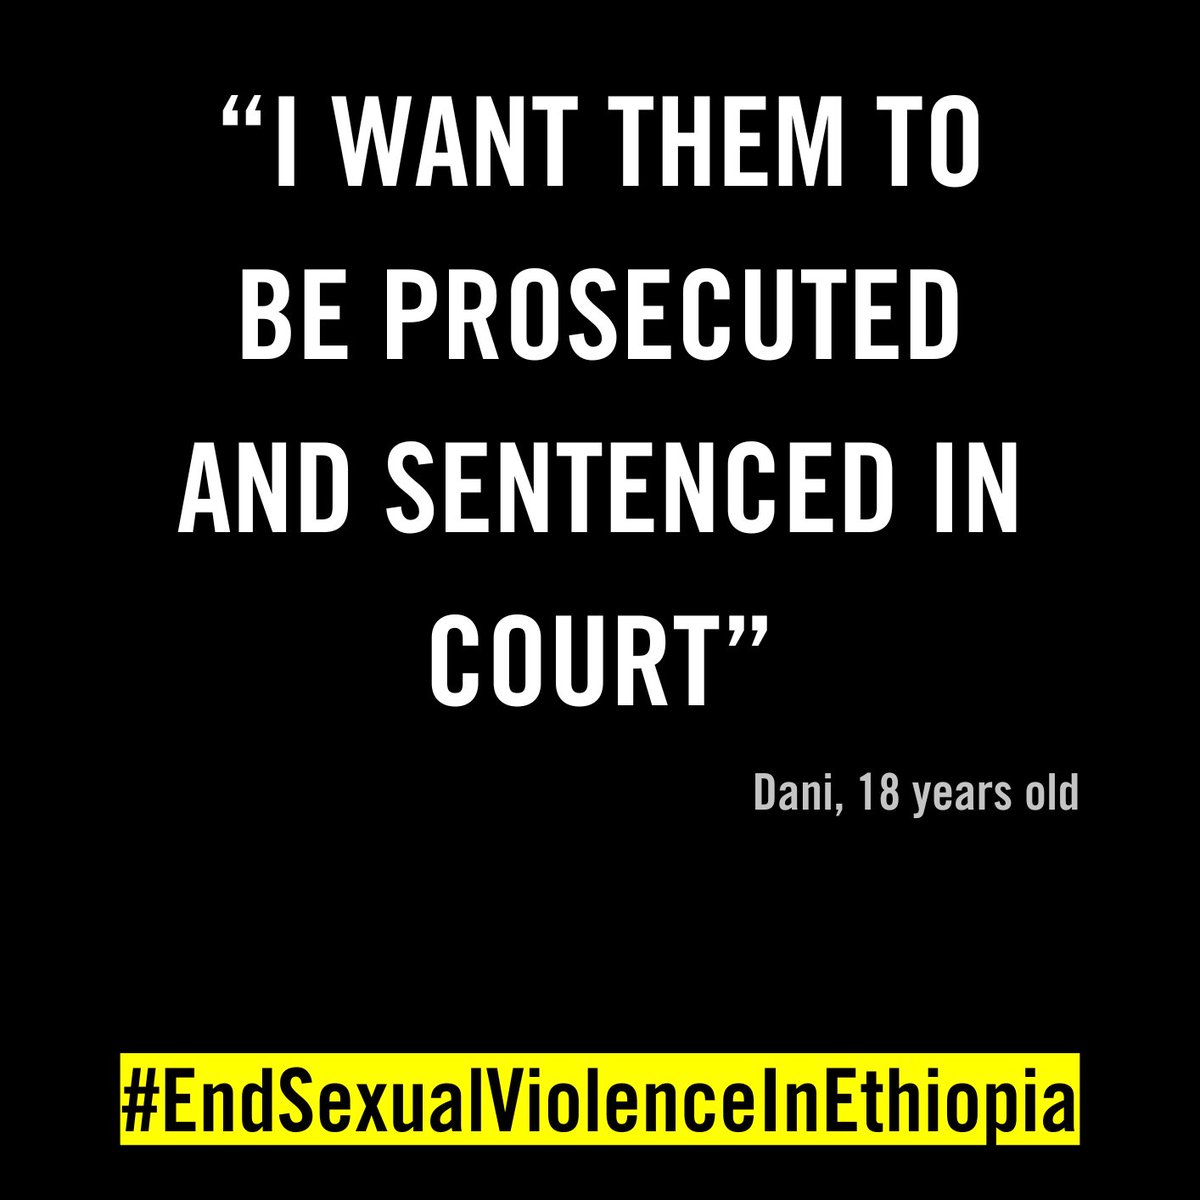 'I don't know if they realized I was a person'. 

We shared harrowing testimonies of women & girls survivors from #Tigray, who suffered rape, gang rape, torture & mutilation.

Survivors deserve justice & accountability. 

#EndSexualViolenceInEthiopia #25November #16Days